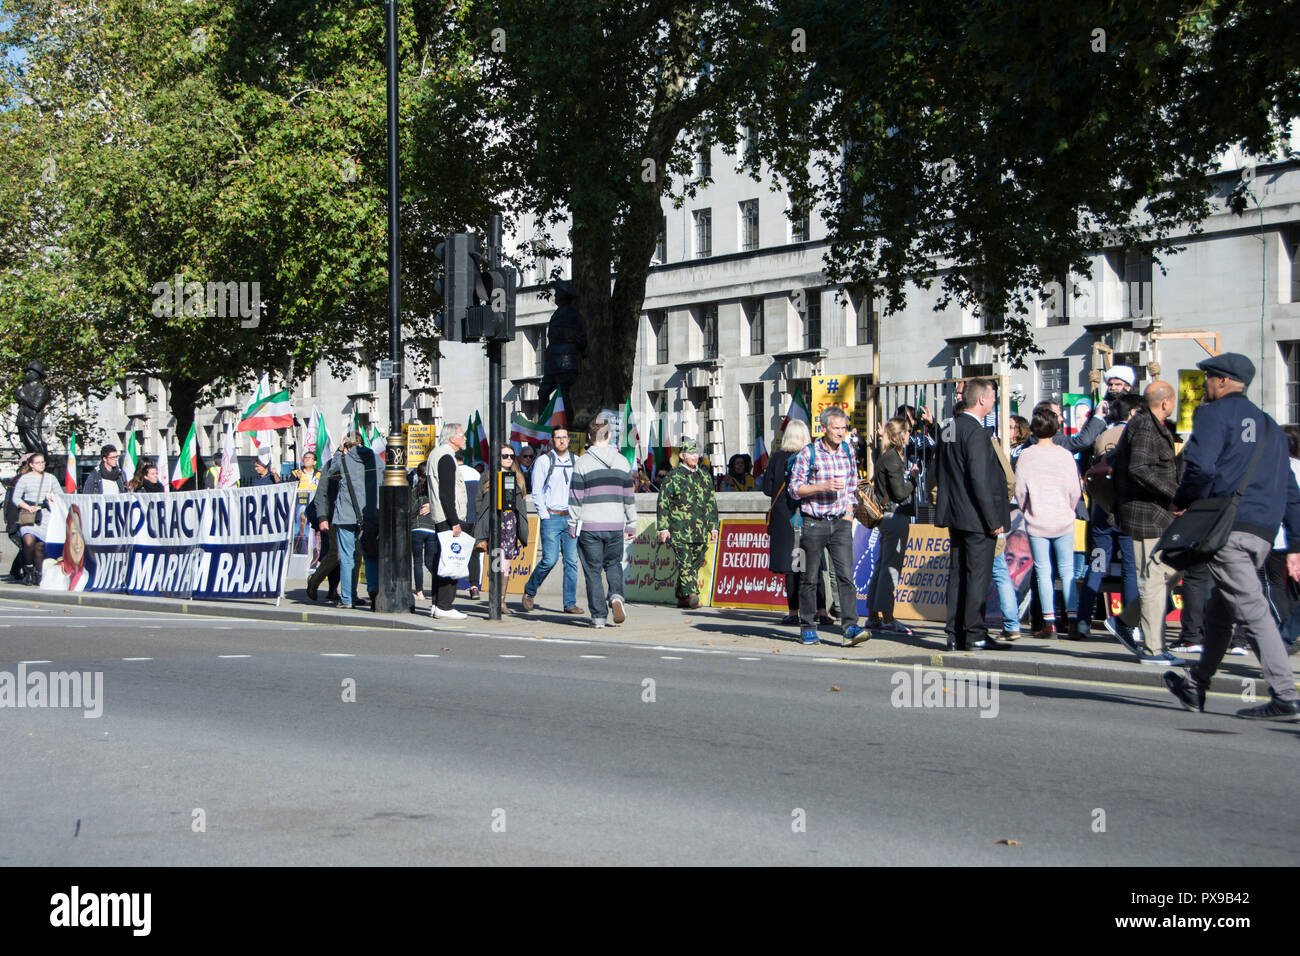 London, England, UK. 20 October, 2018.  Stop executions in Iran protest in Whitehall, London, UK © Jansos / Alamy Live News. Stock Photo